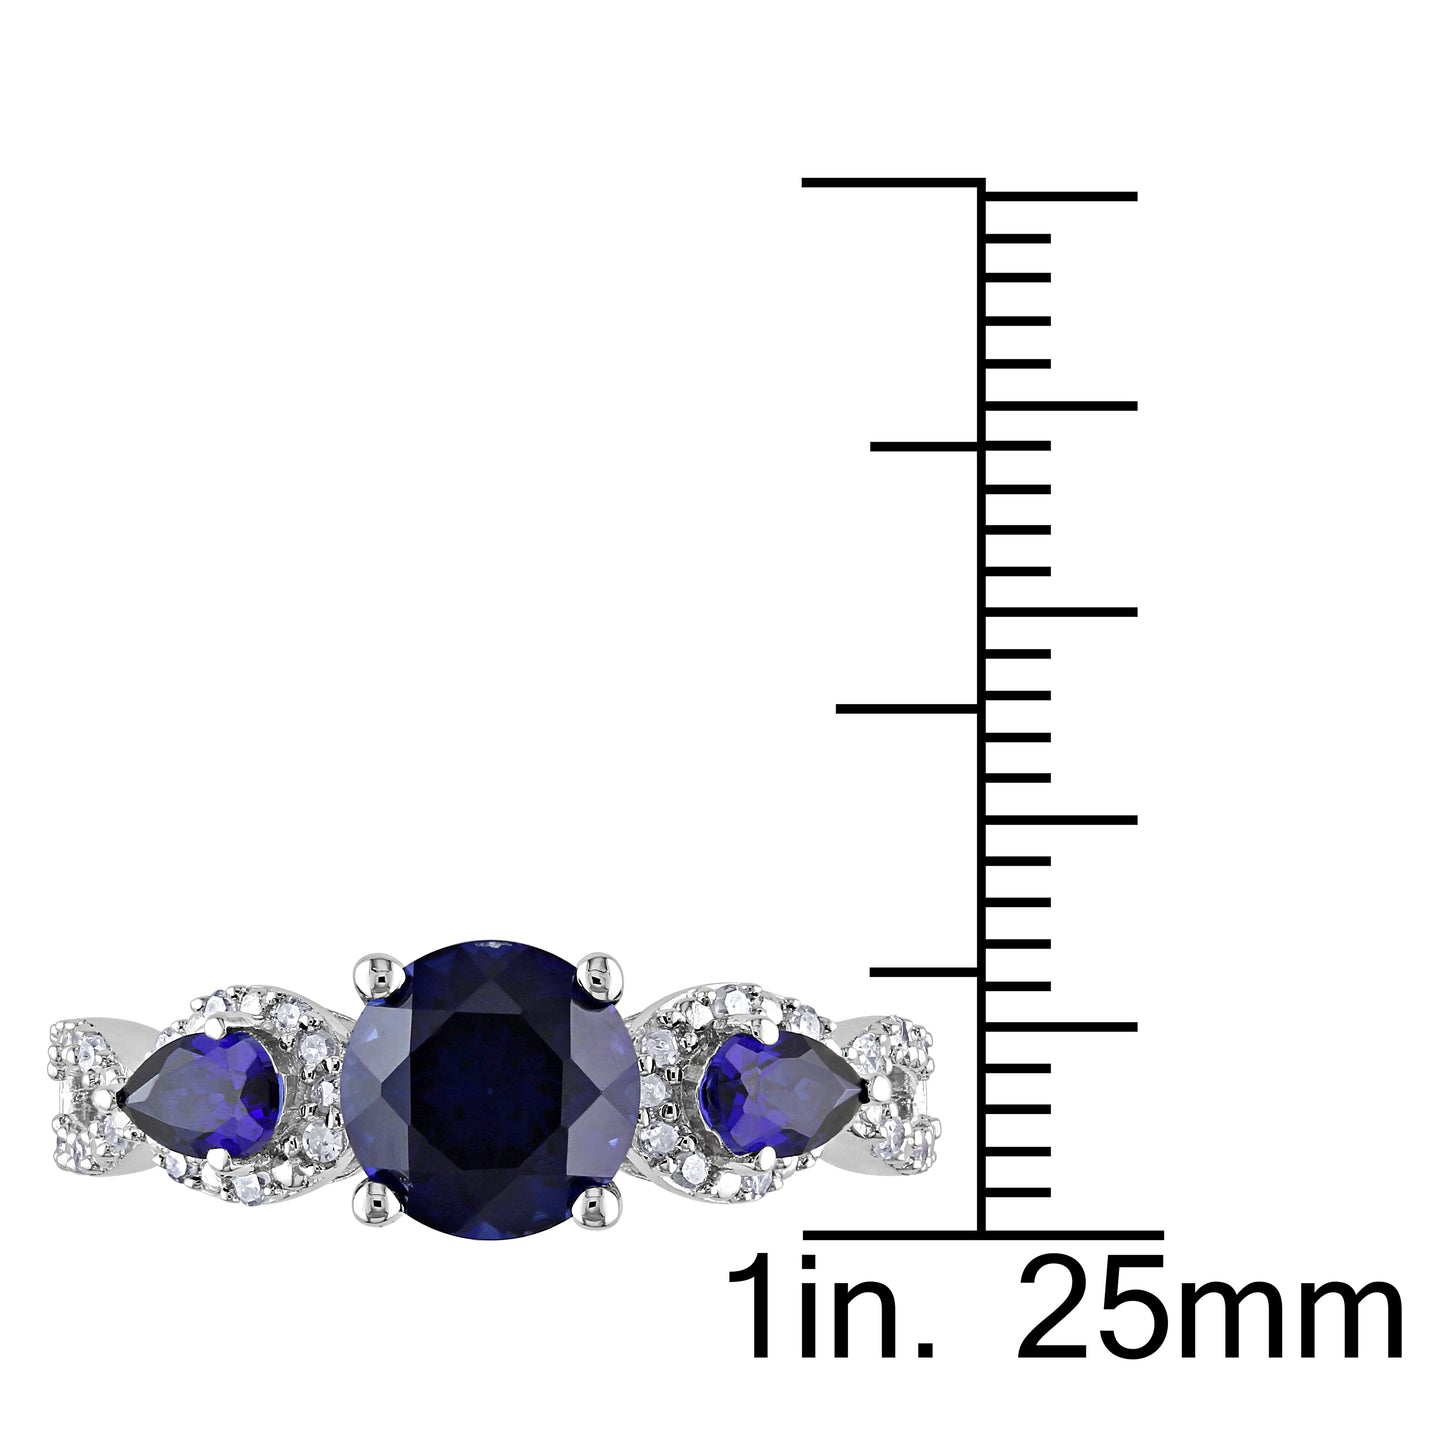 3 Stone Sapphire & Diamond Halo Ring in Sterling Silver